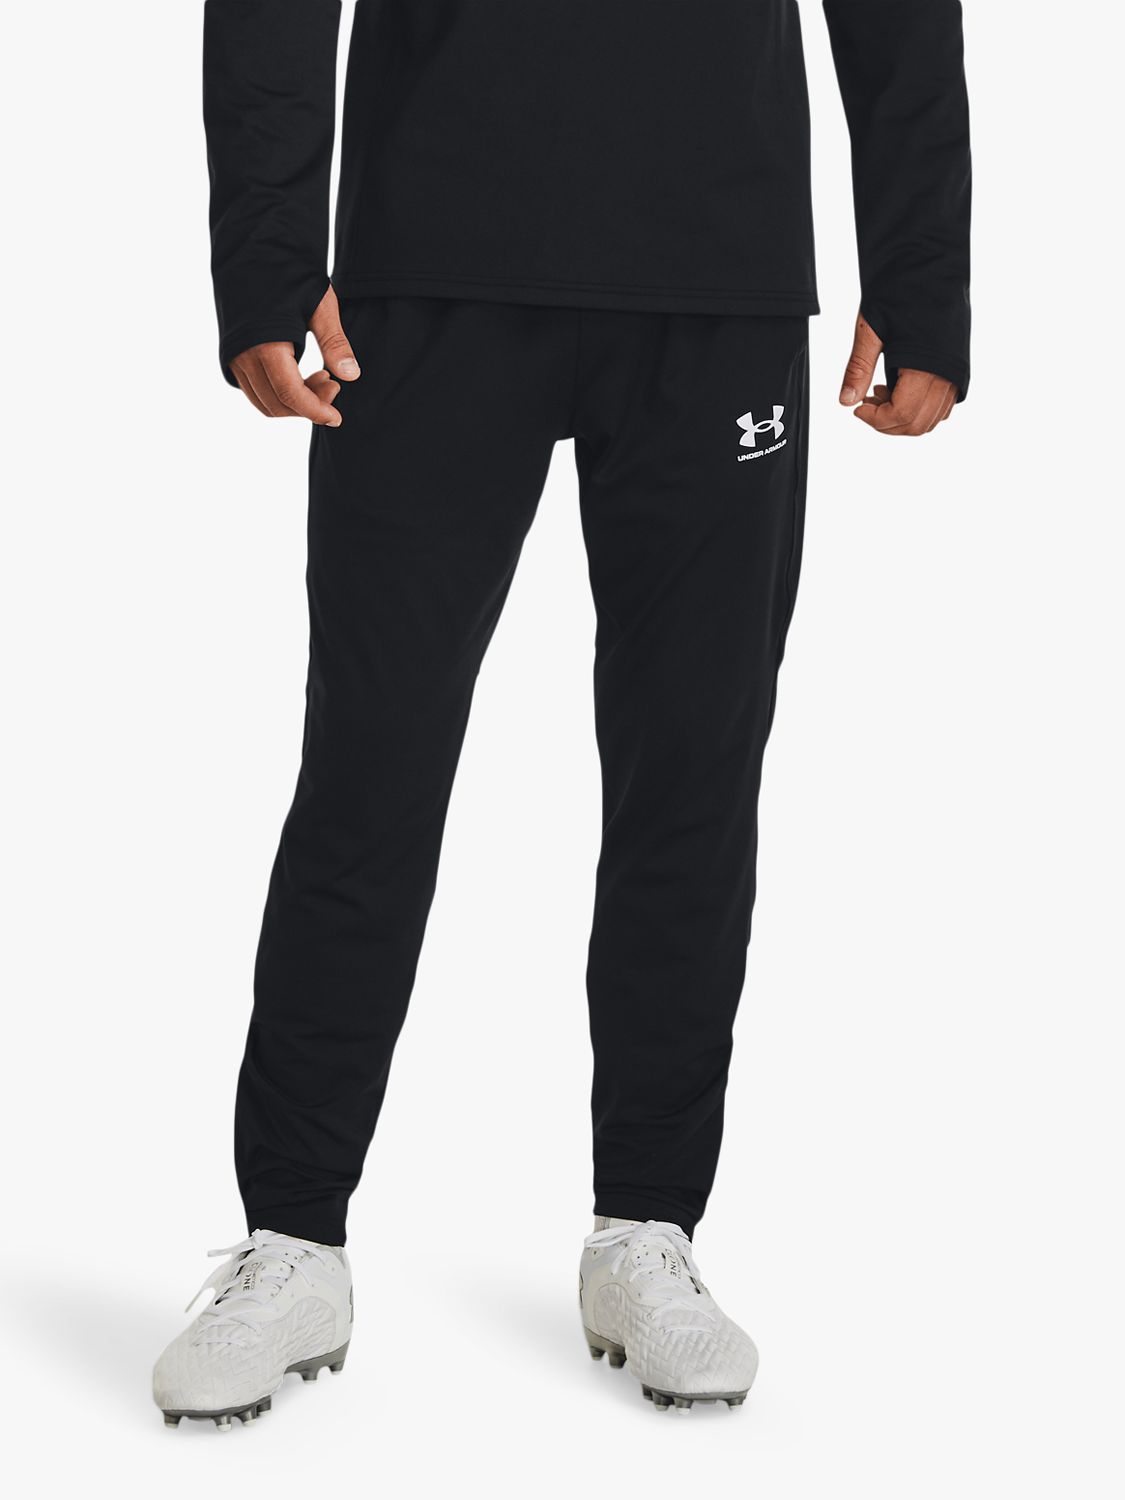 Under Armour Challenger Football Trousers, Black/White, XL